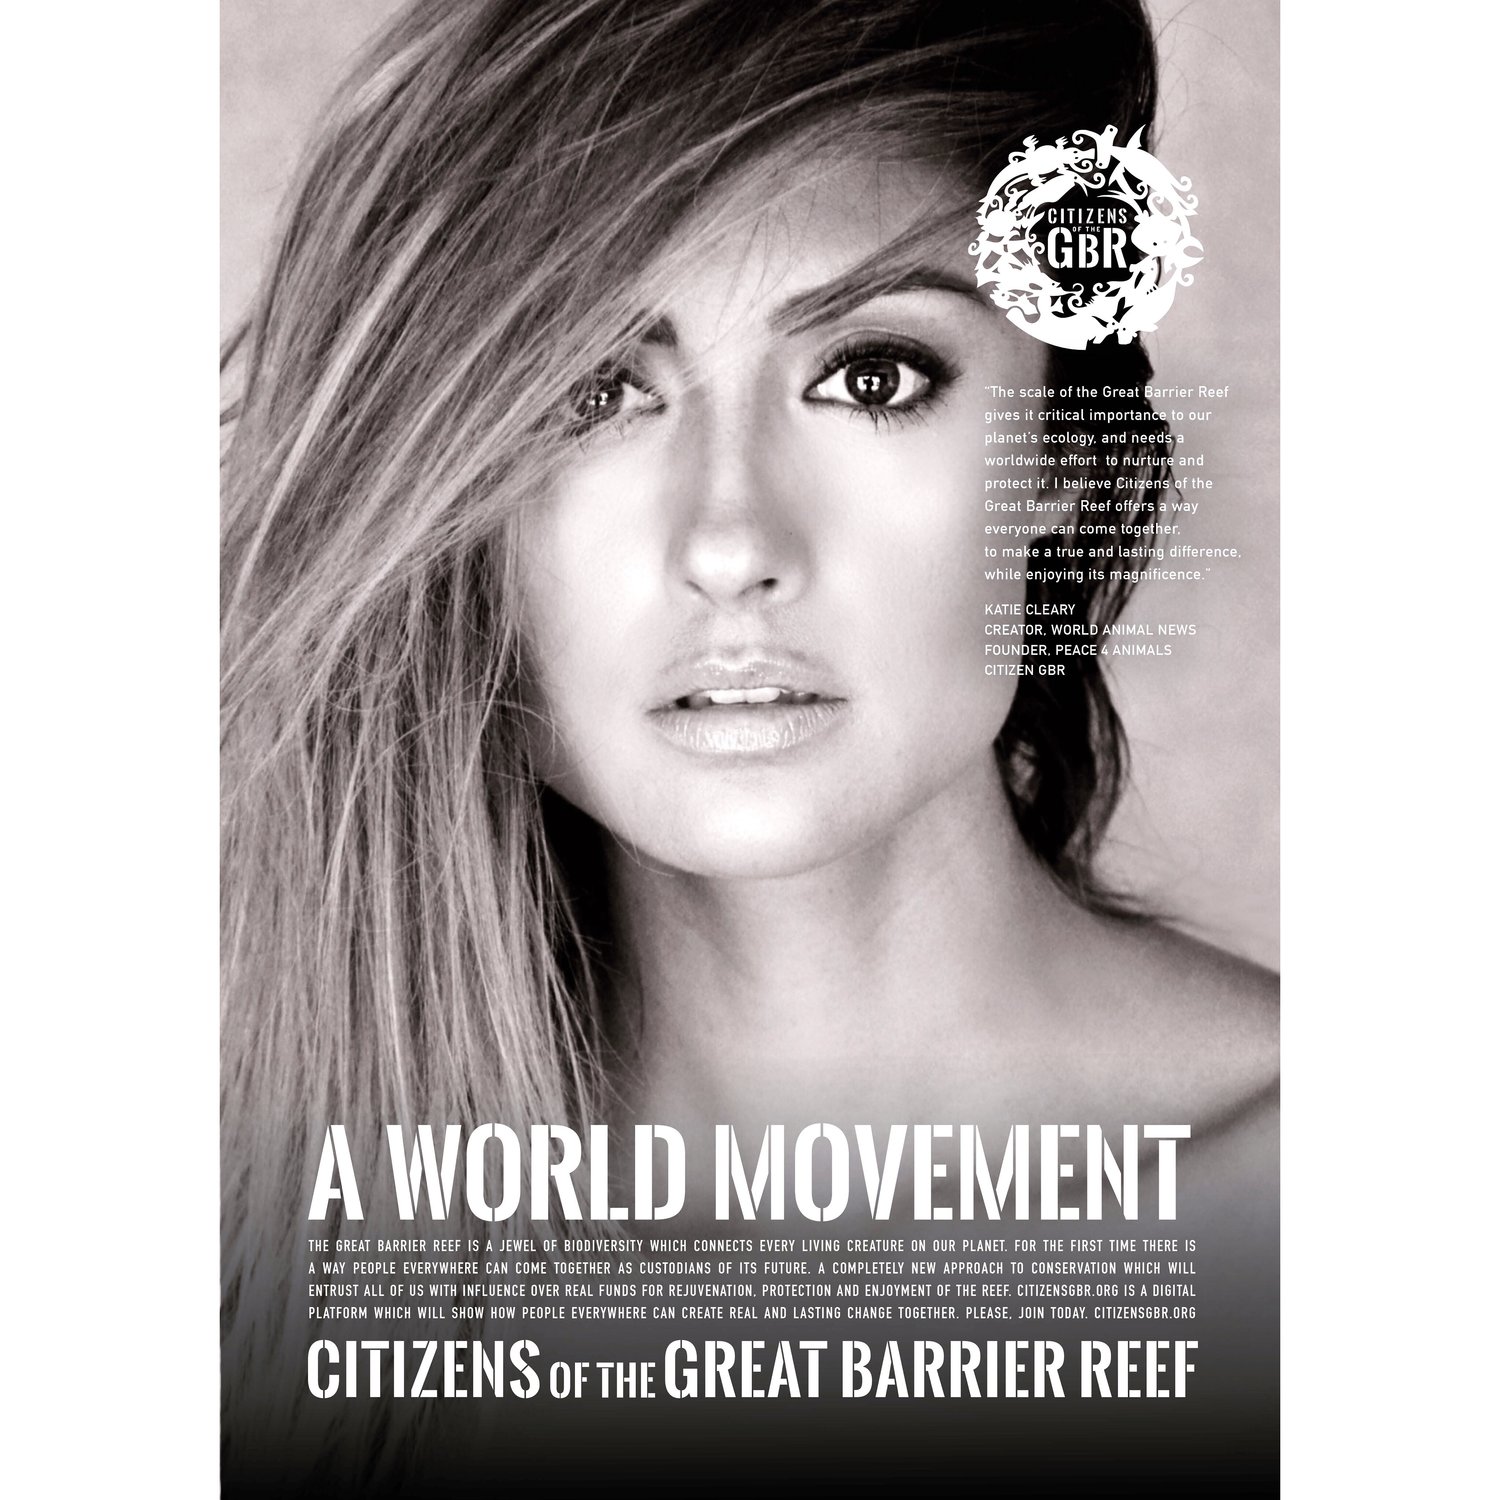 Katie Cleary World Movement